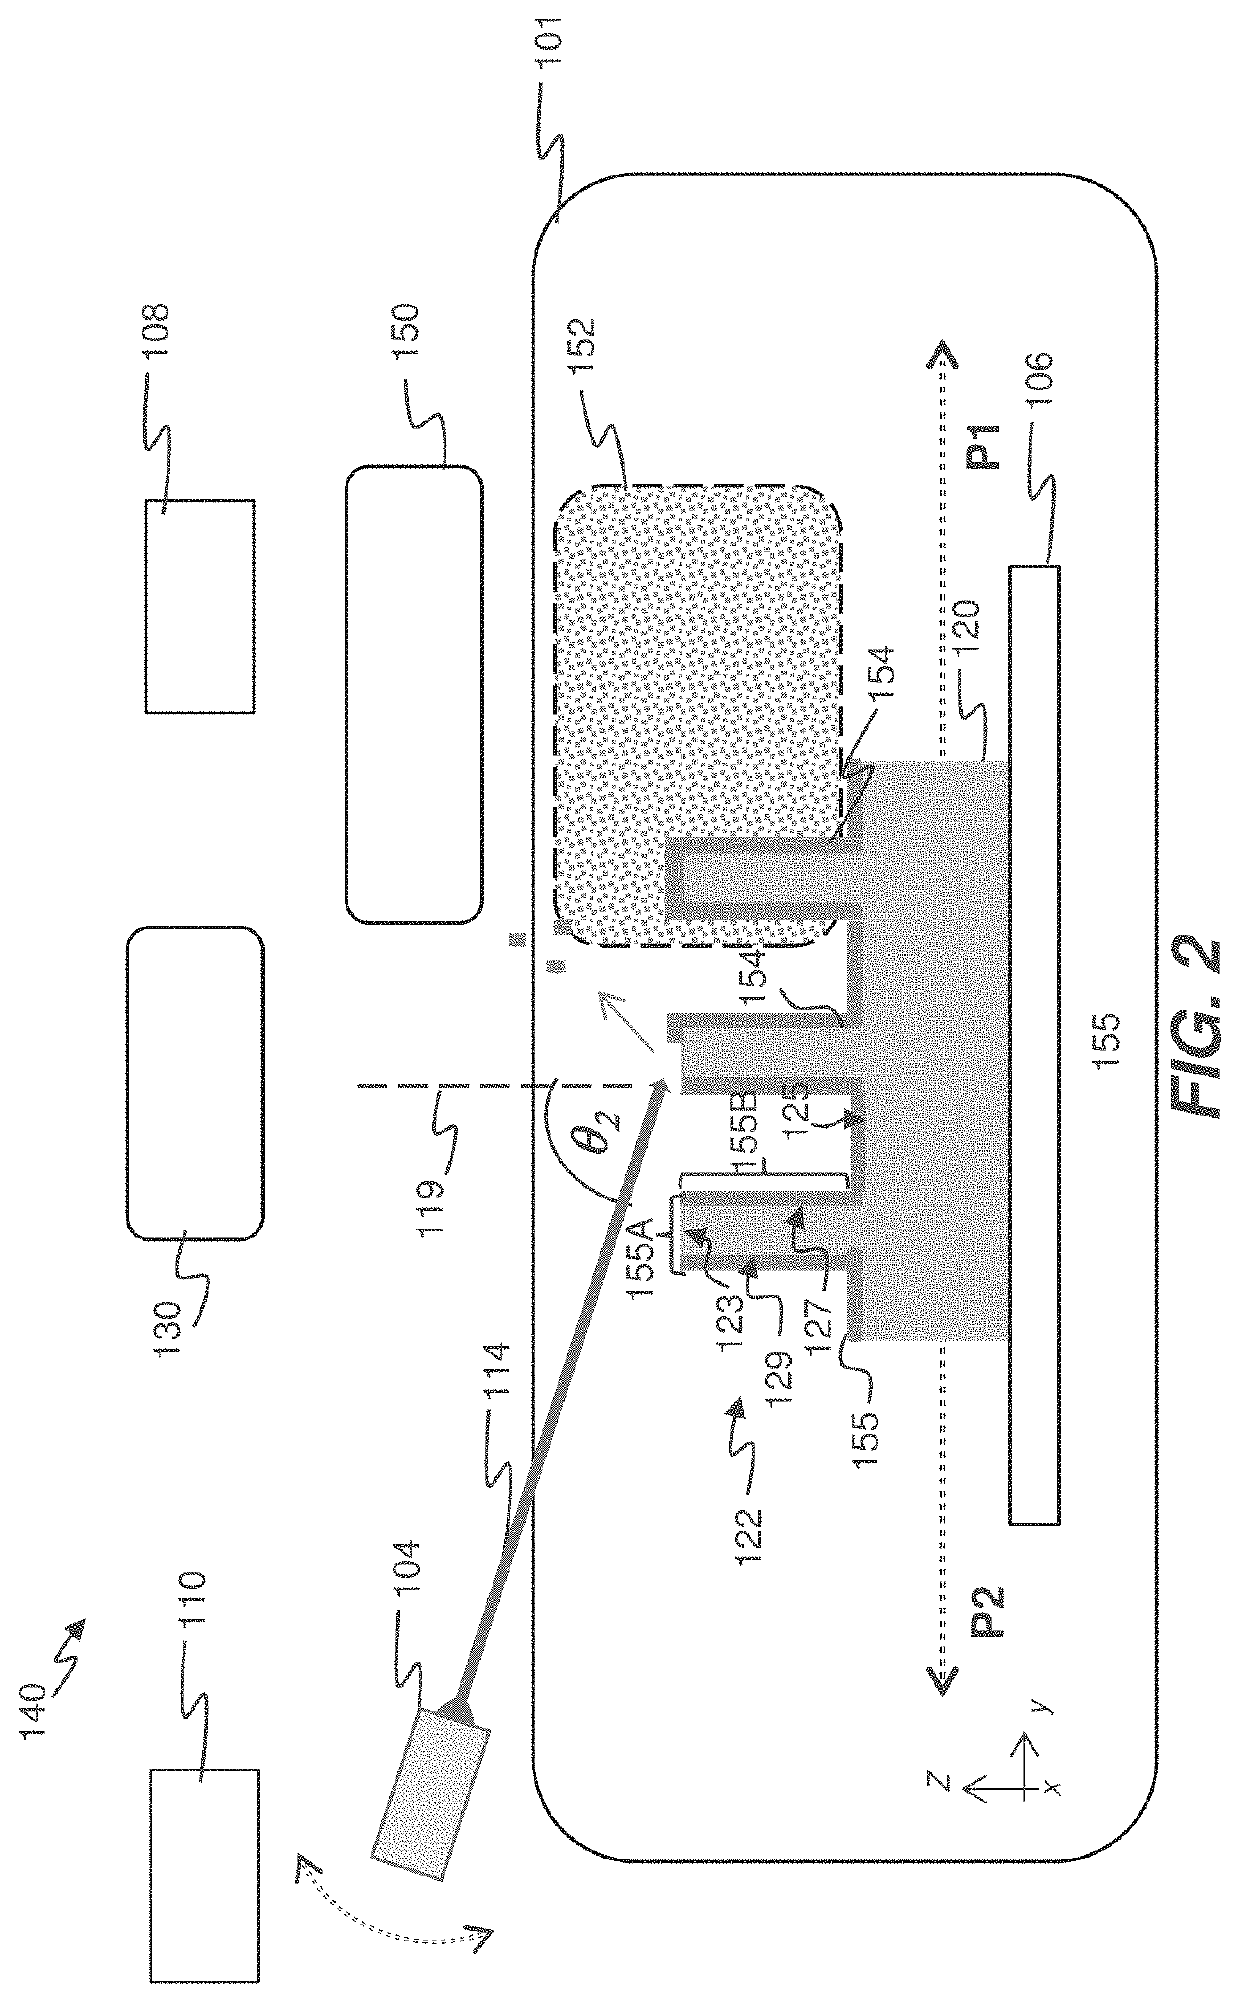 Techniques, system and apparatus for selective deposition of a layer using angled ions